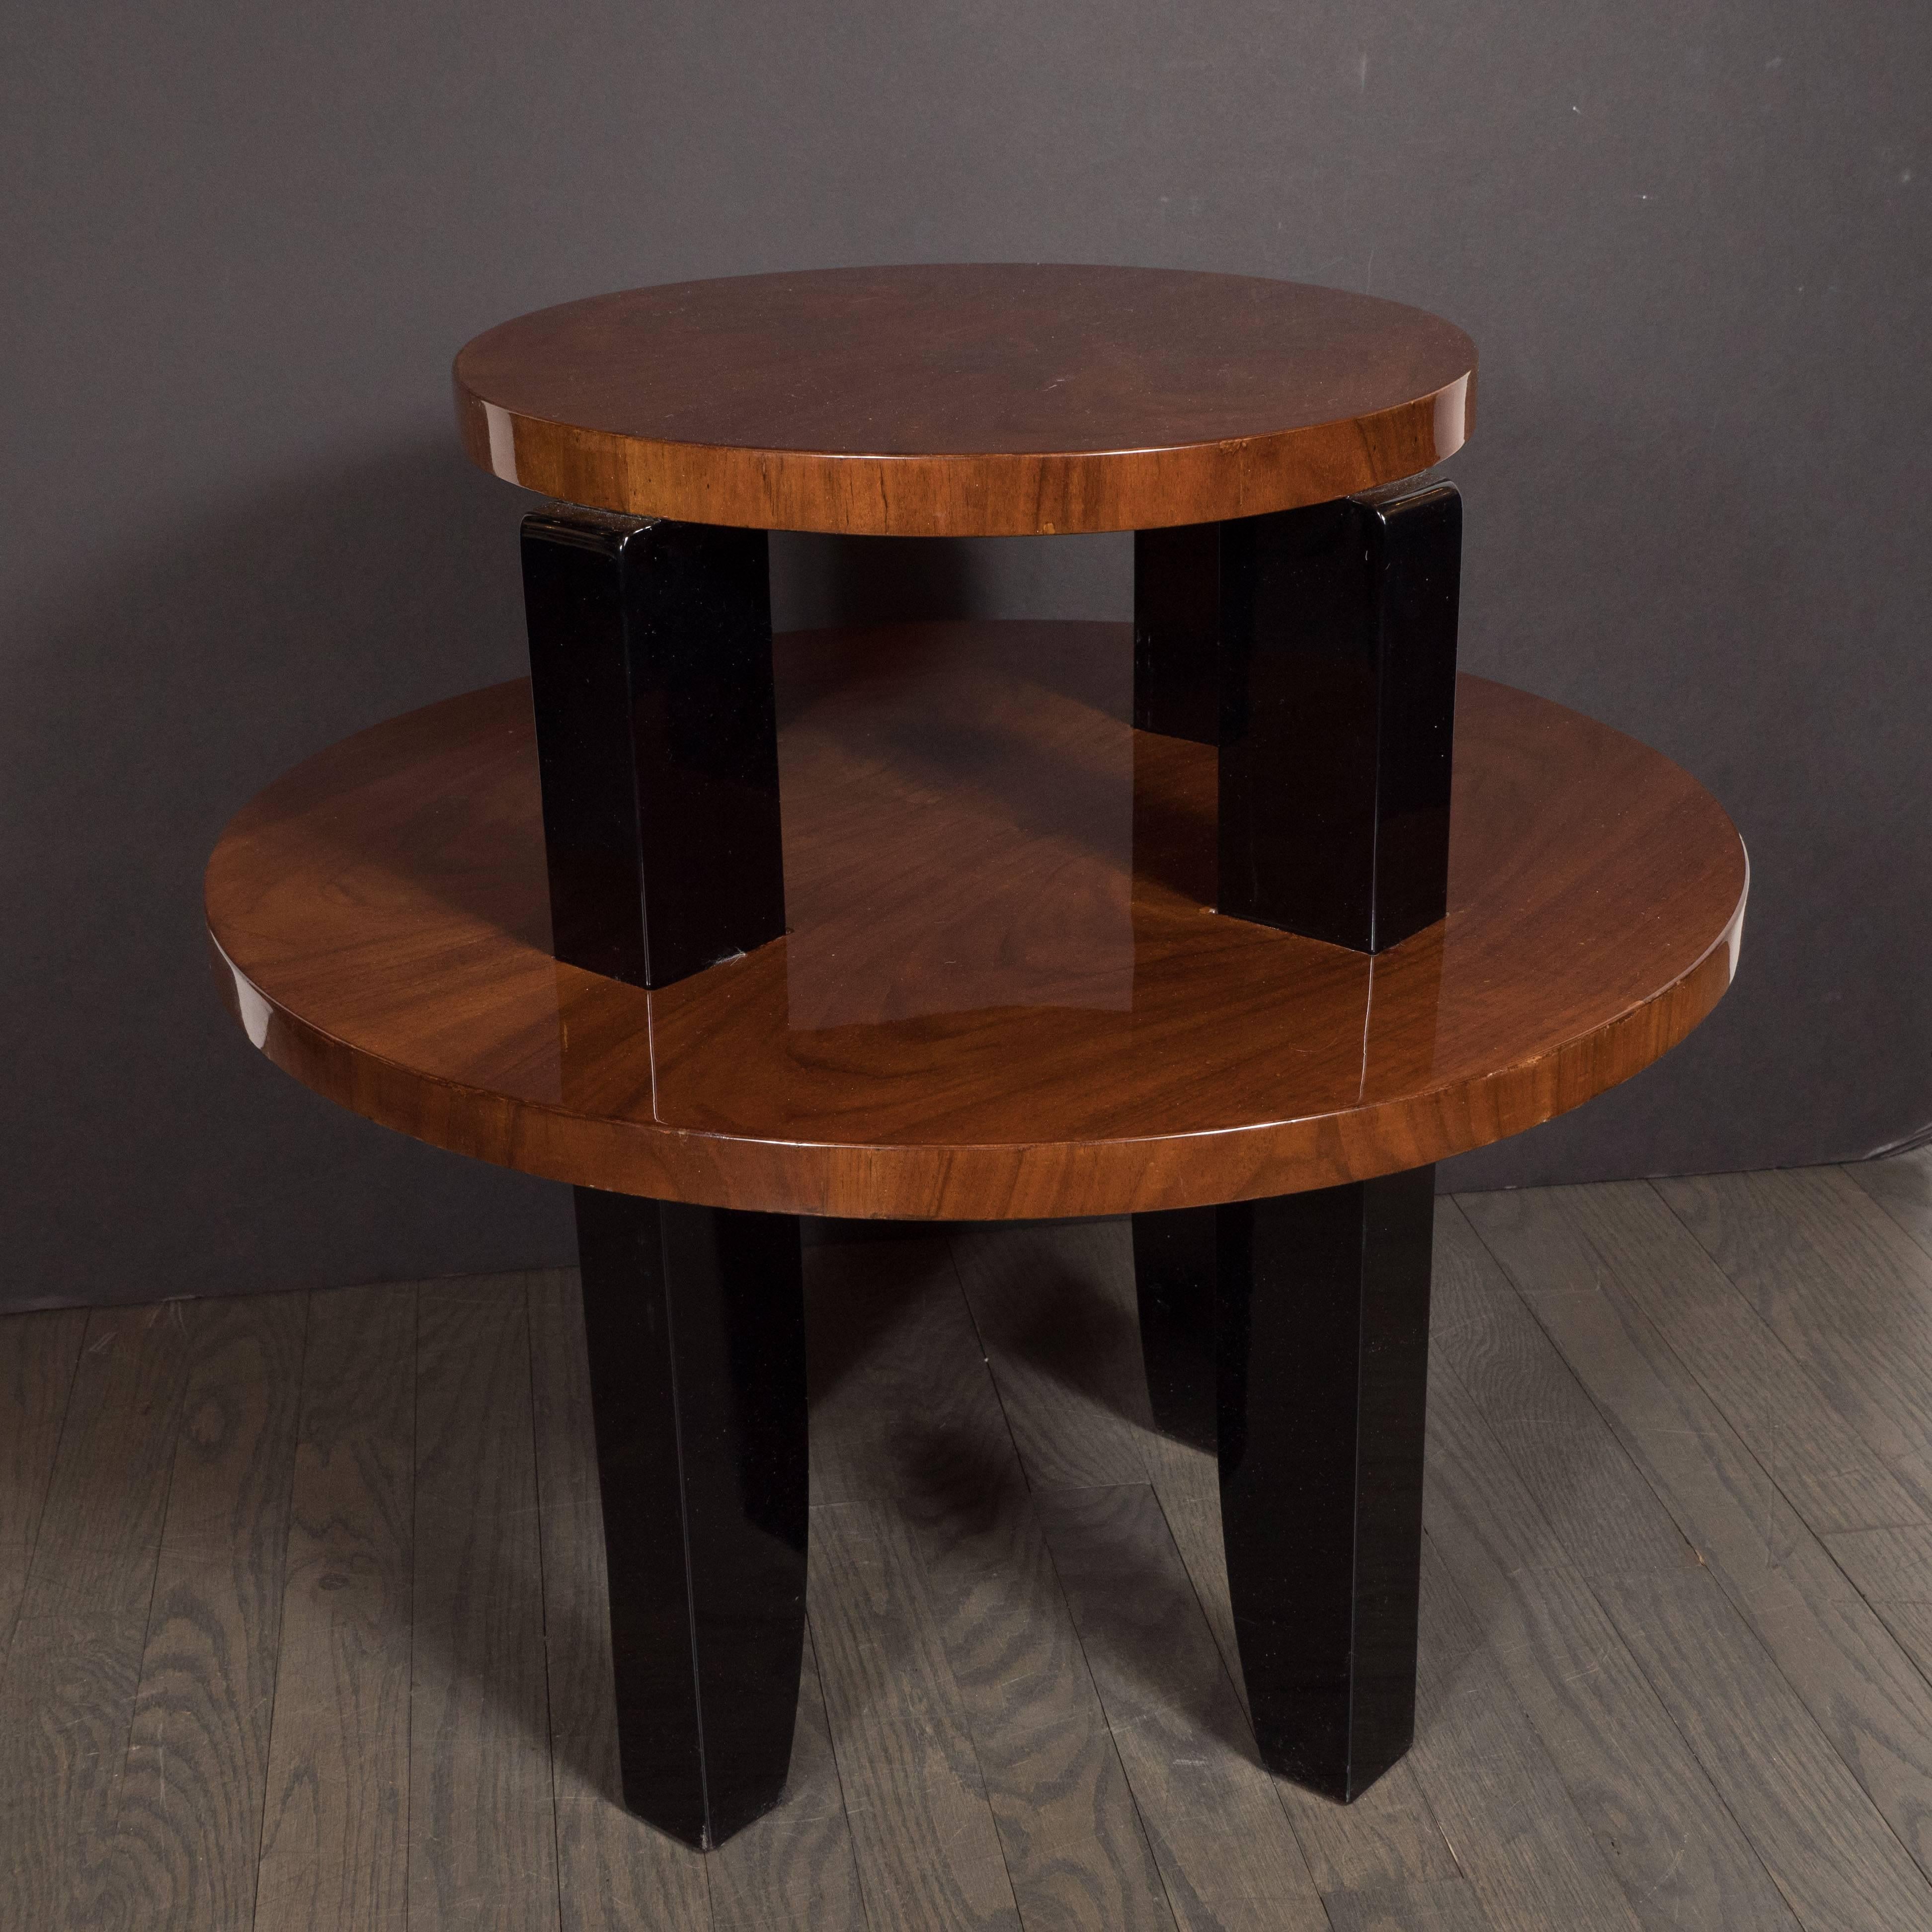 French Art Deco Two-Tier Occasional/Side Table in Walnut and Black Lacquer 1